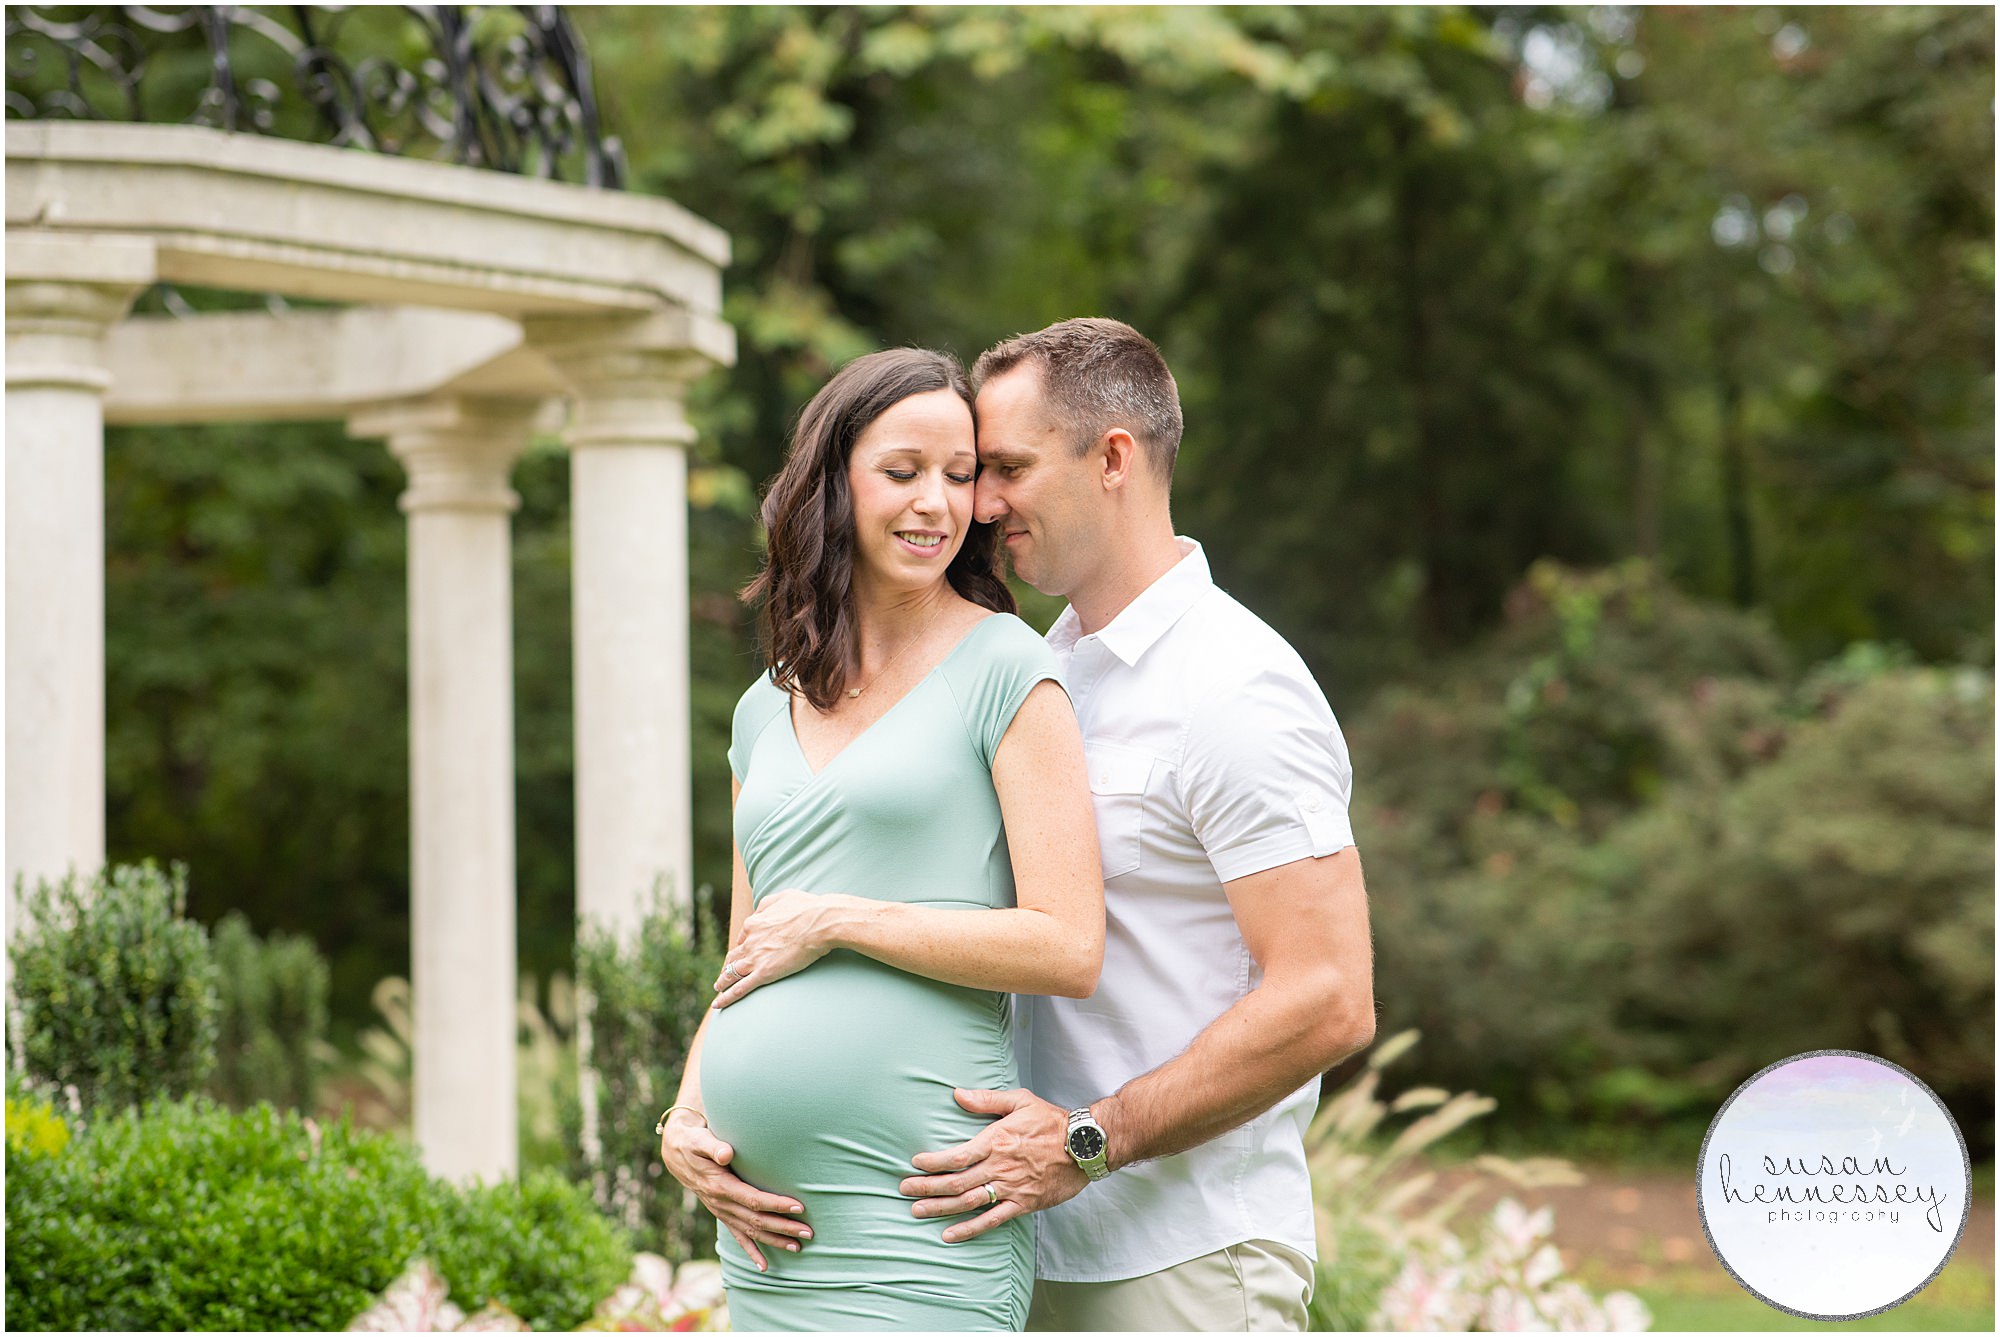 Sayen Gardens maternity session in New Jersey